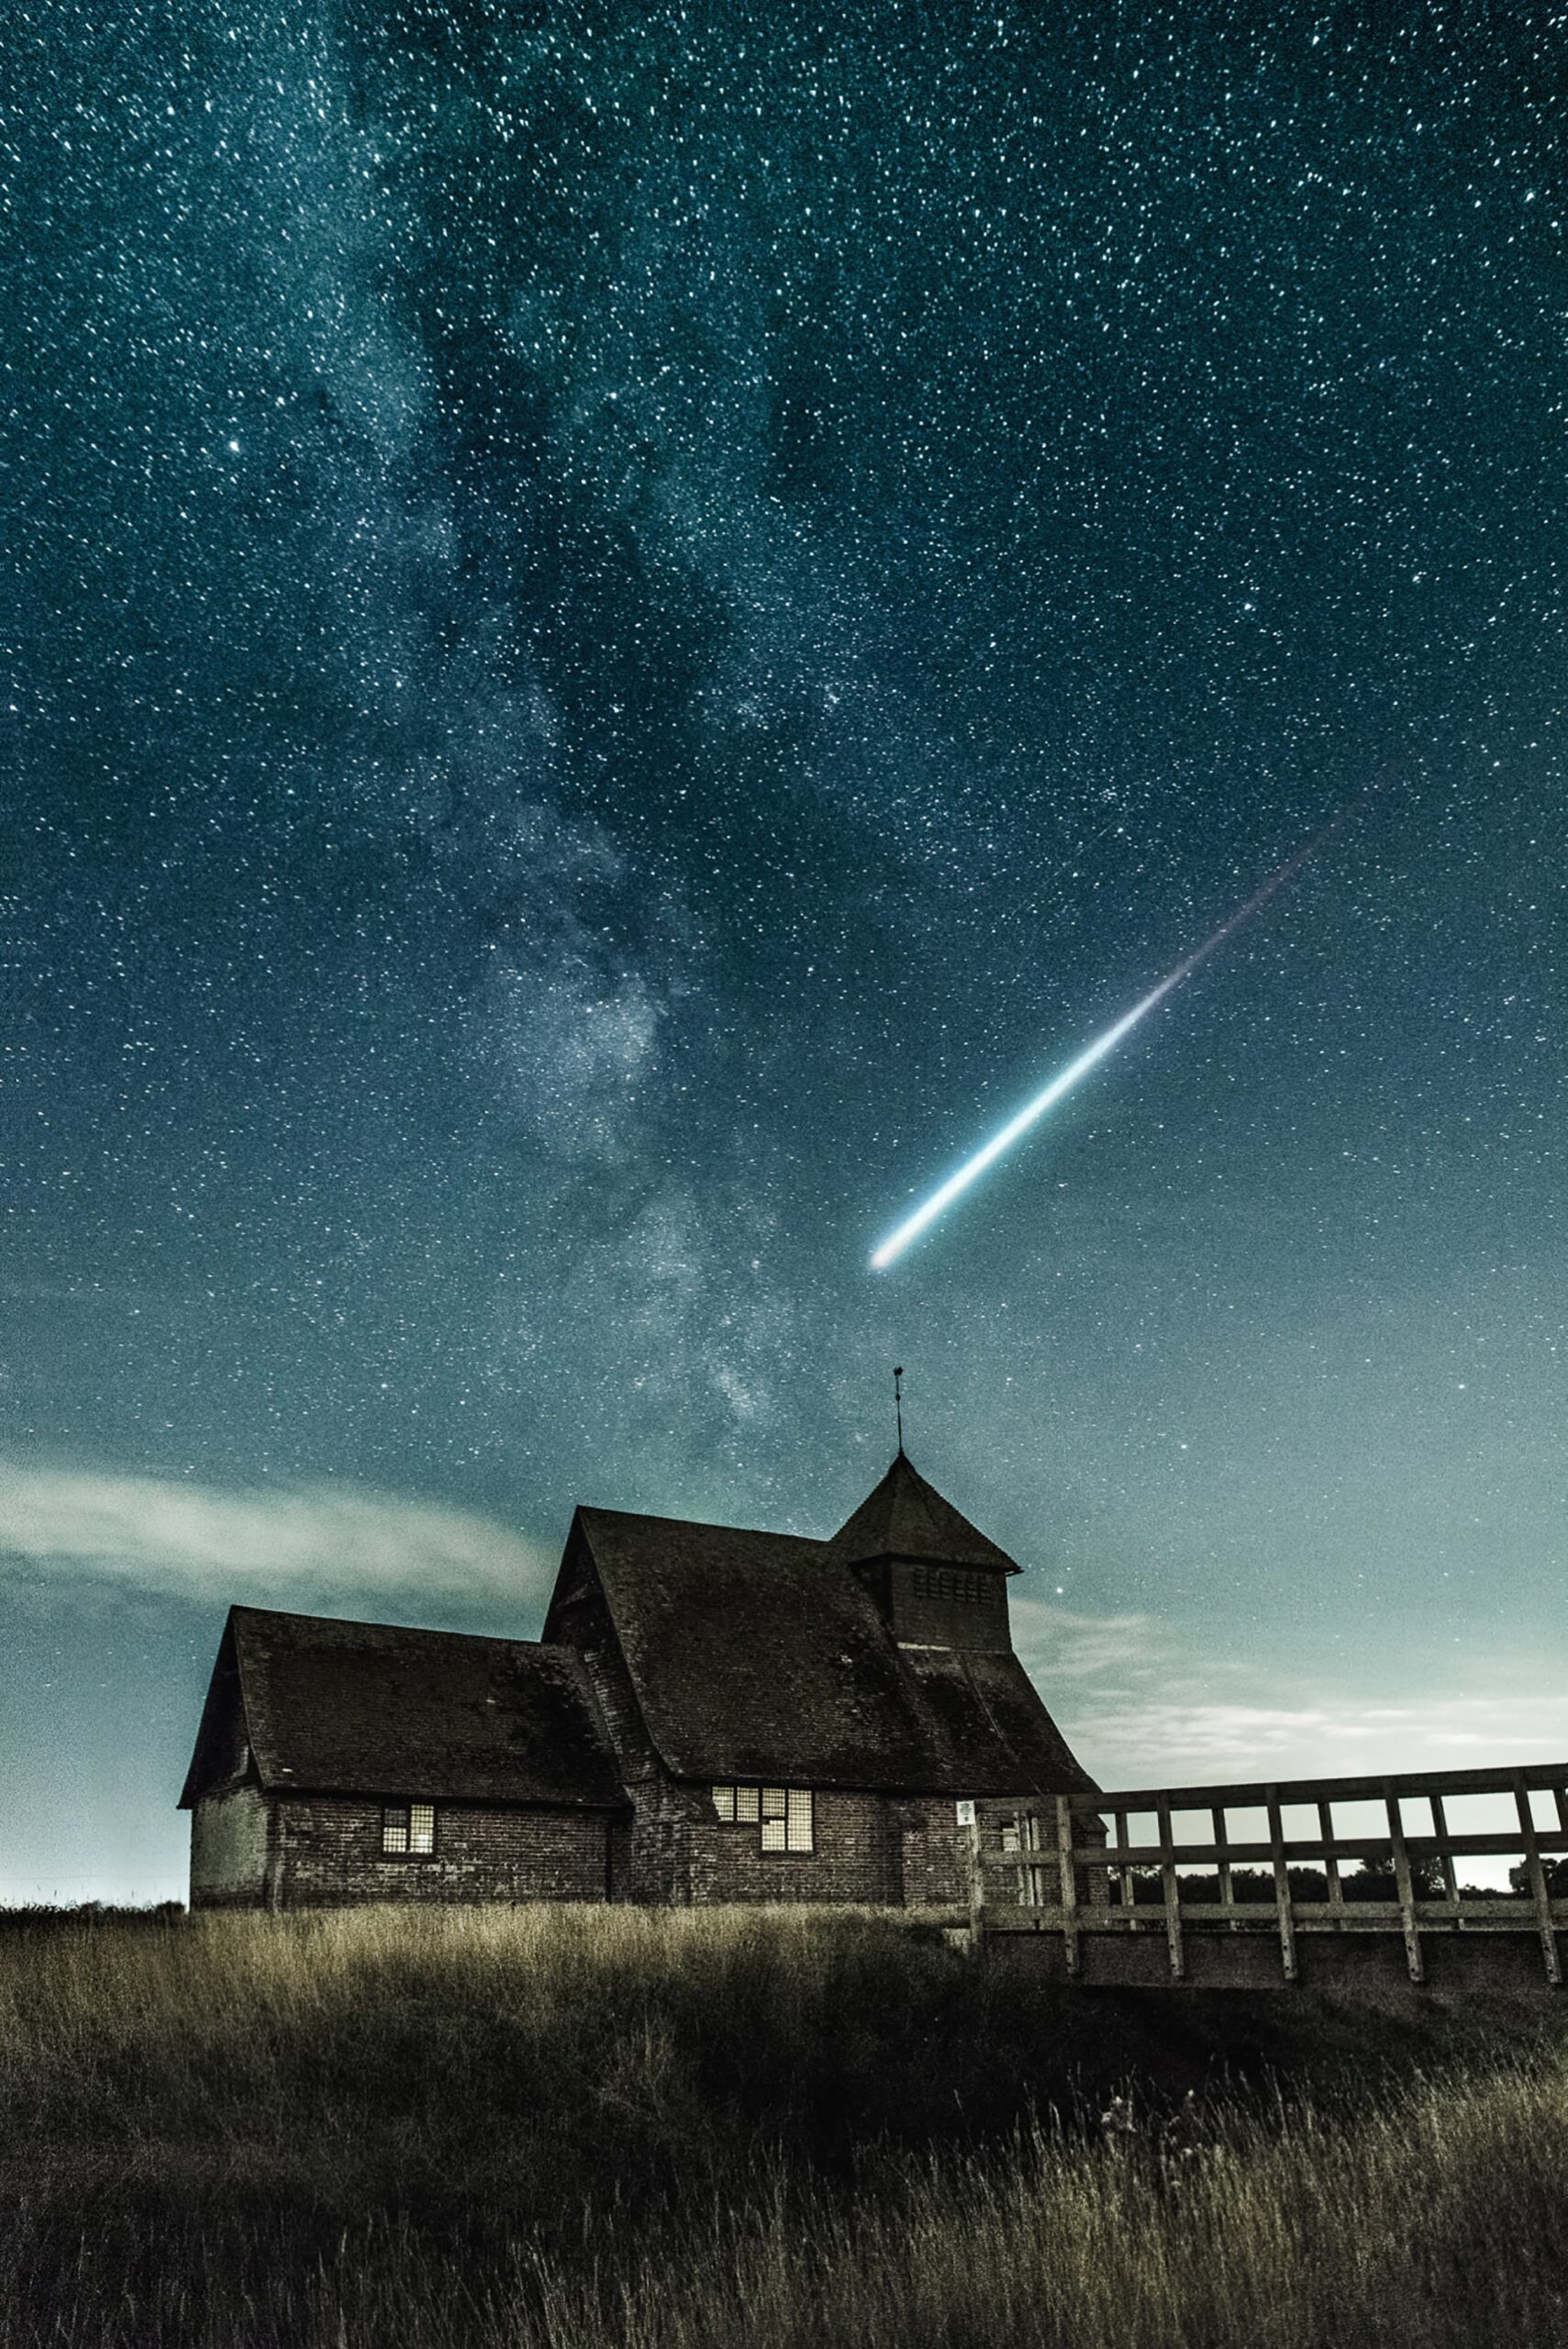 A comet shooting through a starry night sky above a house in a field